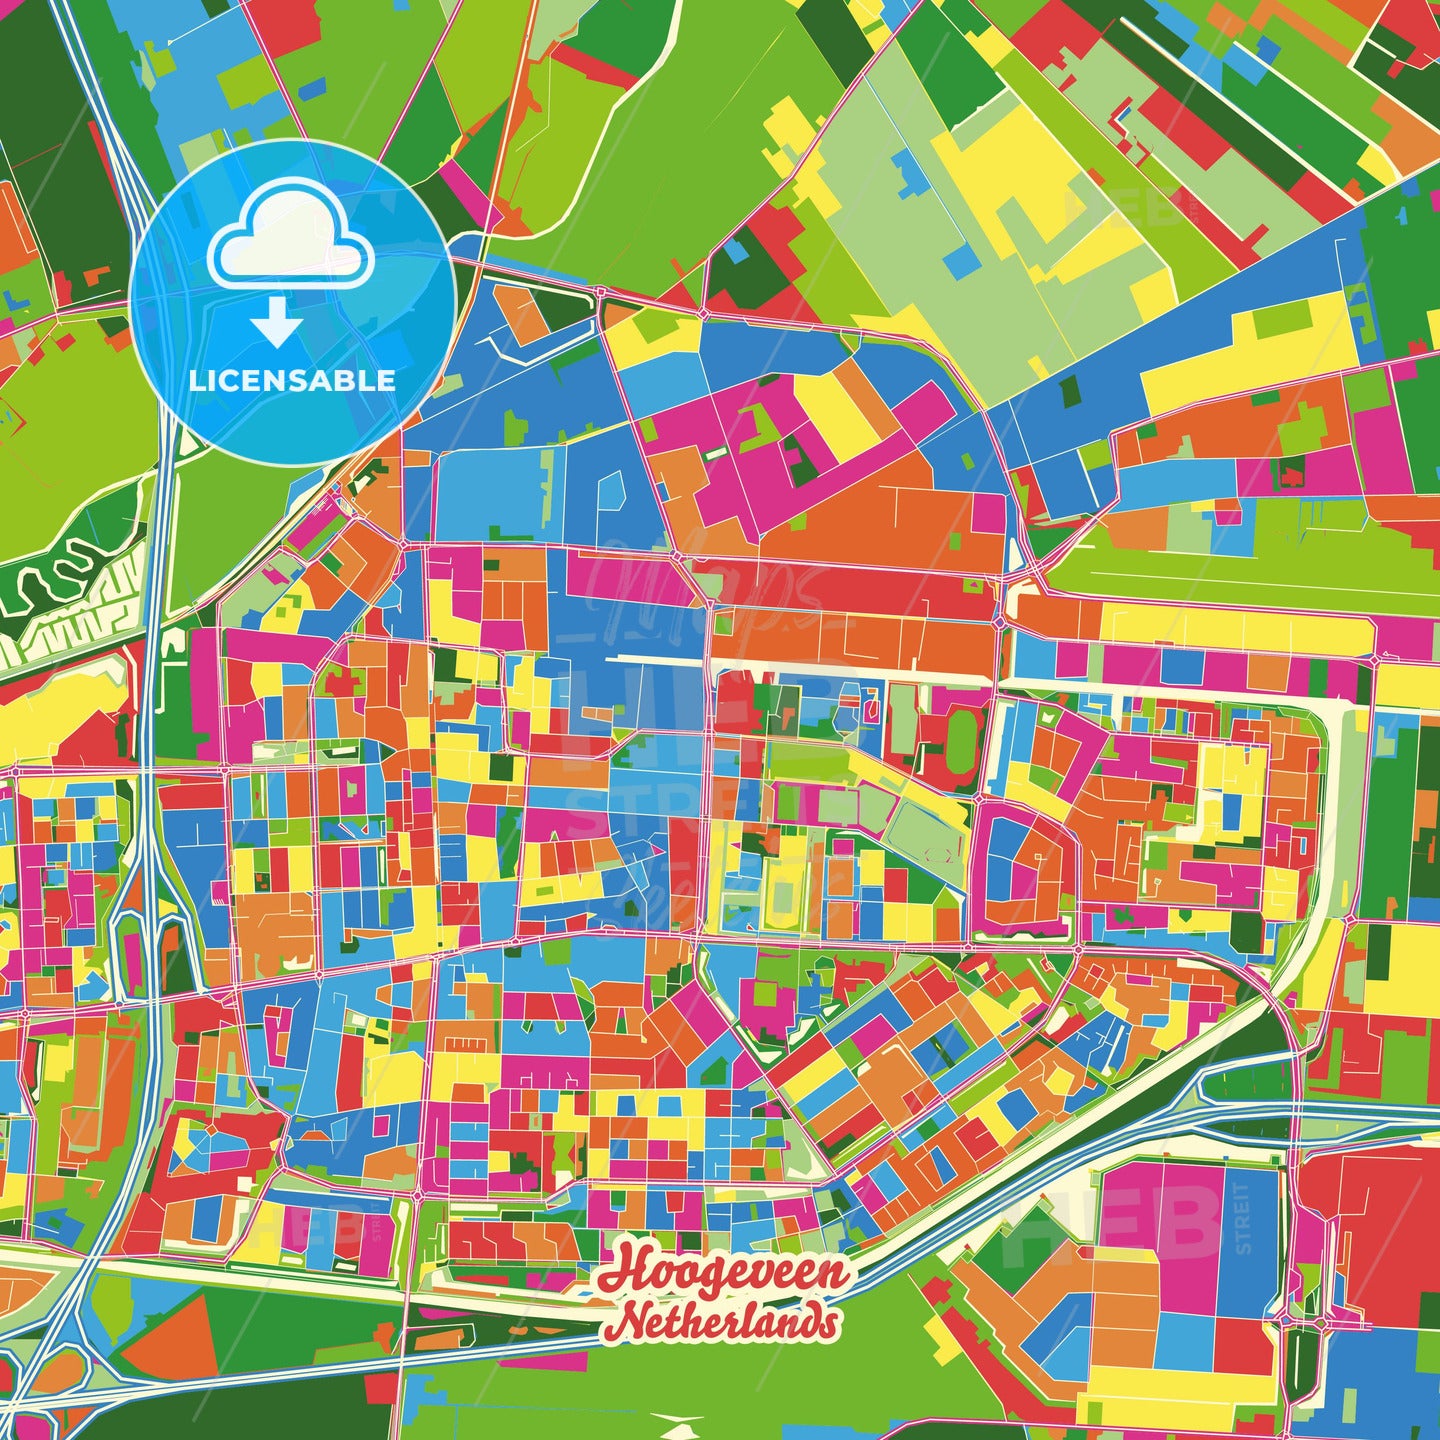 Hoogeveen, Netherlands Crazy Colorful Street Map Poster Template - HEBSTREITS Sketches